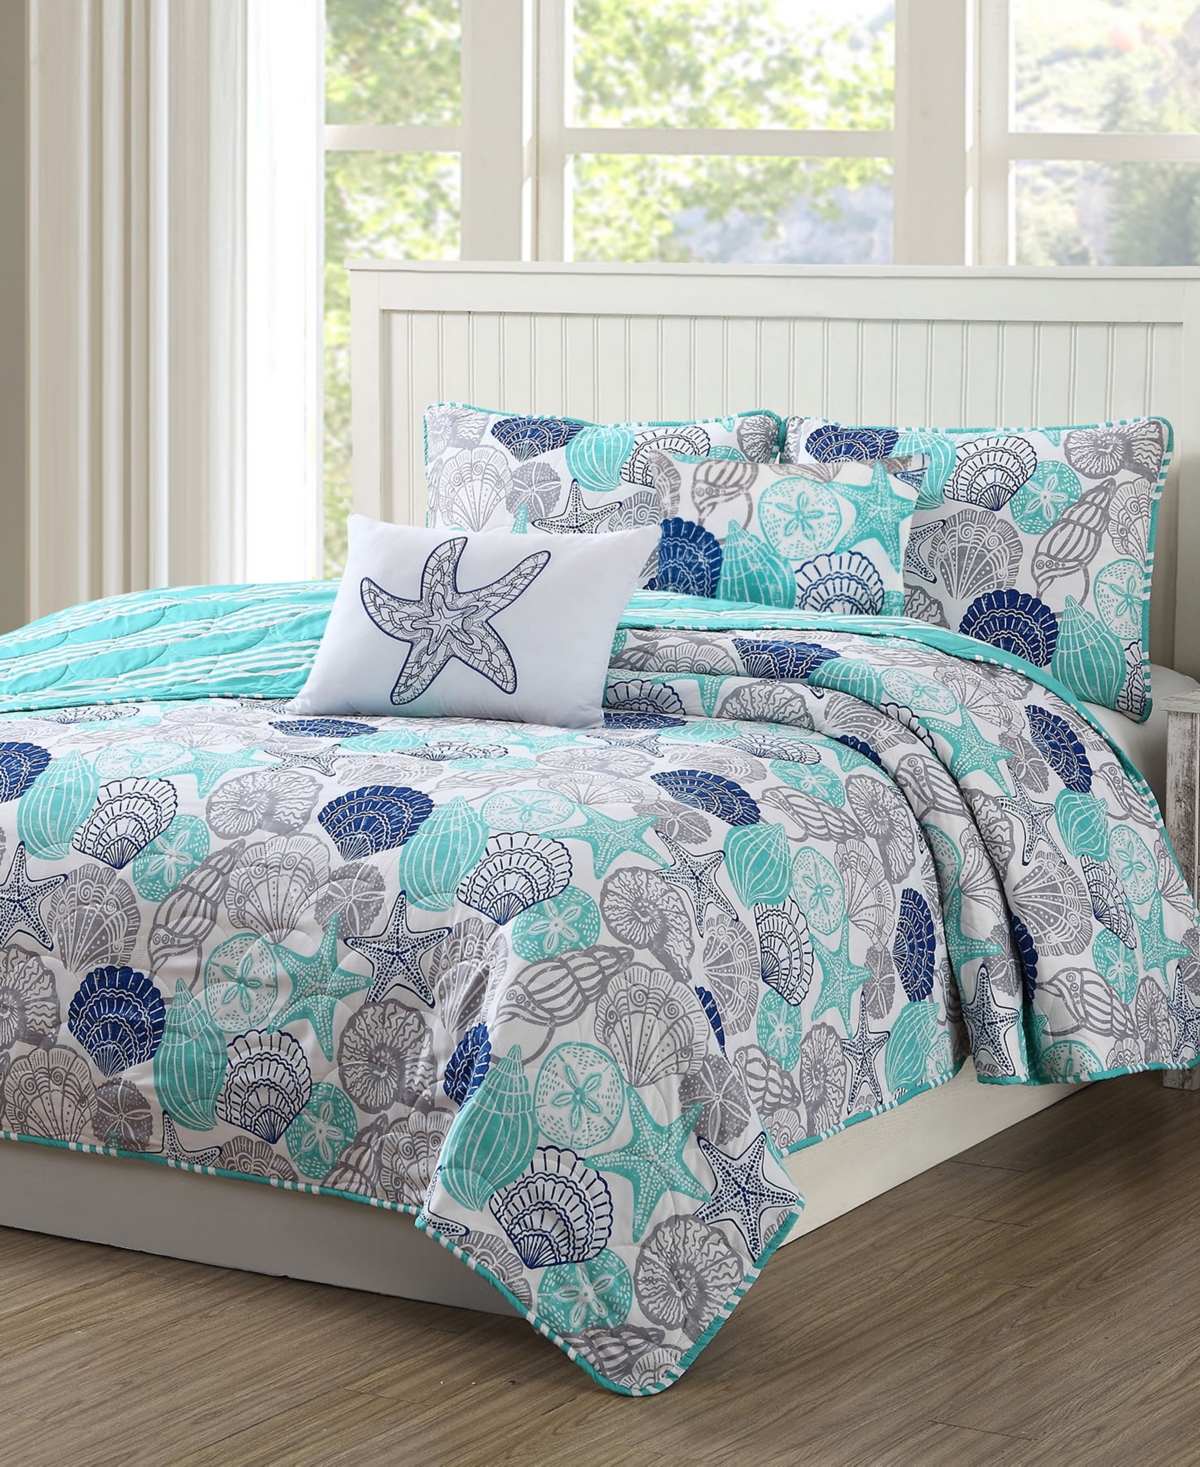 Seashell and Starfish Print Reversible 4 Piece Quilt Set, Twin Bedding